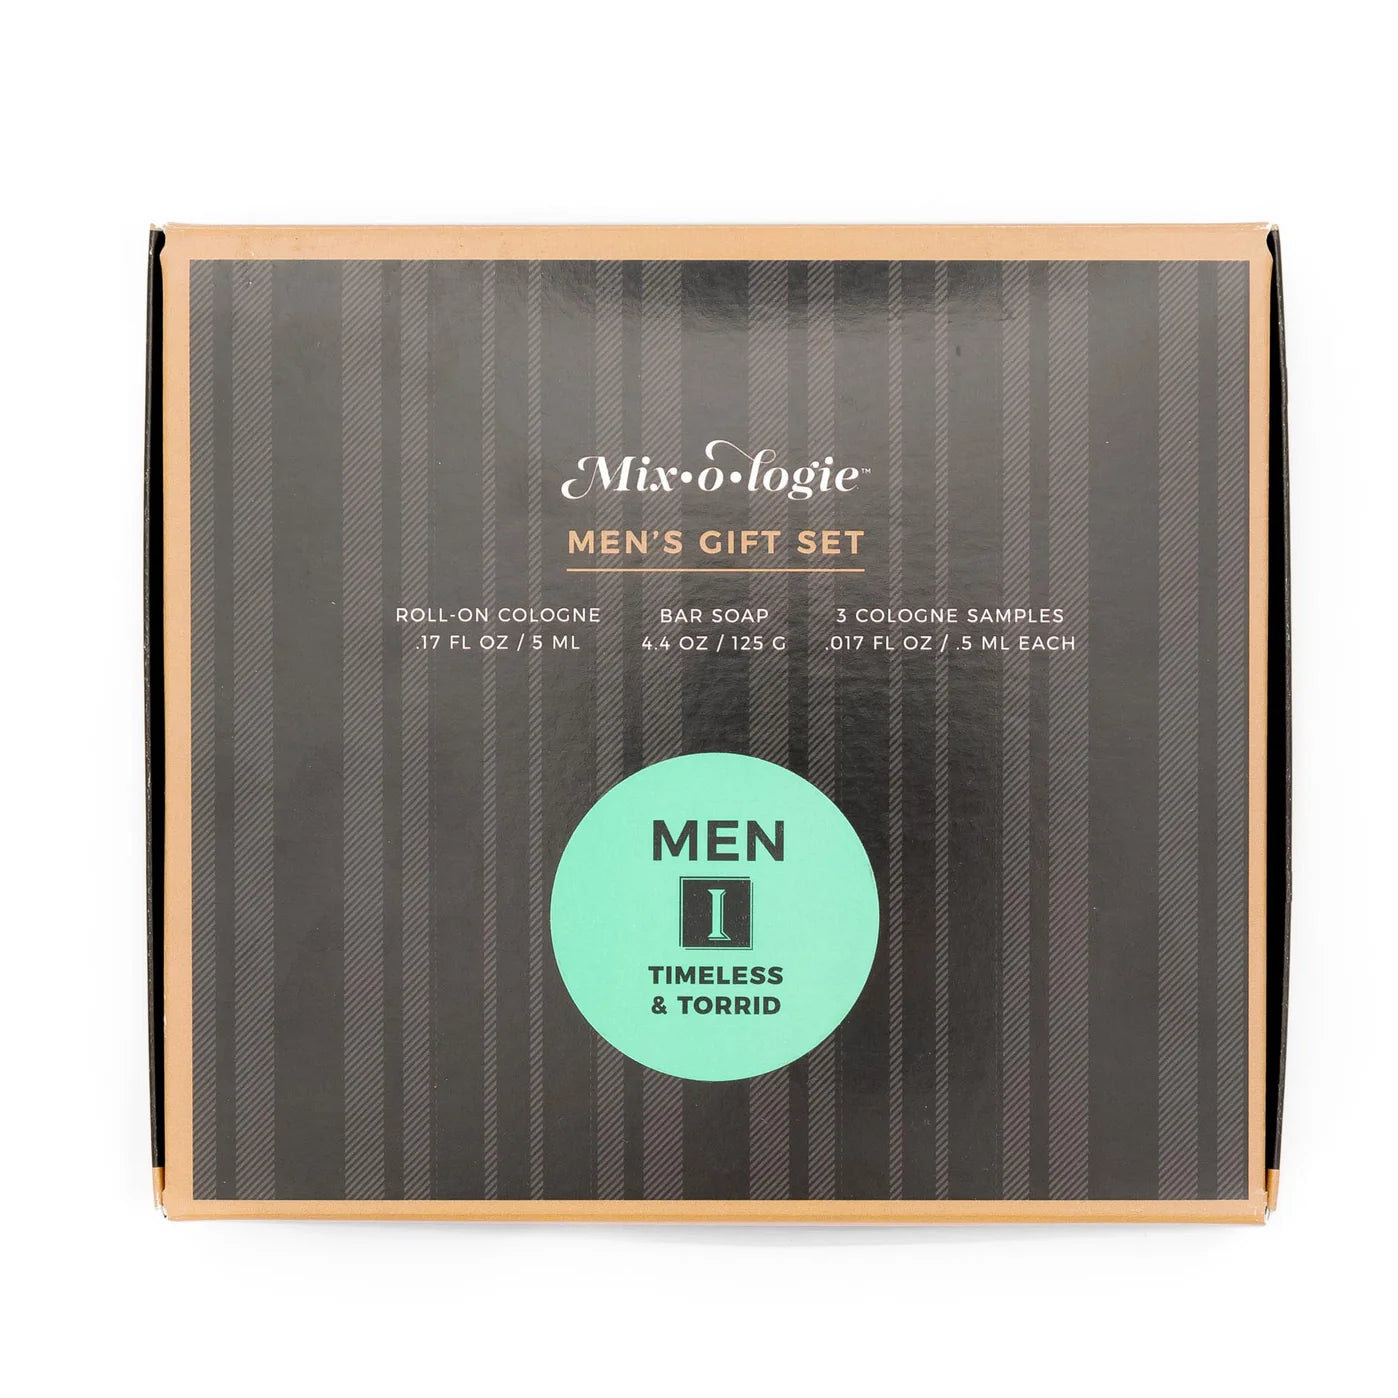 PREORDER: Men's Gift Set Duo in Four Scents